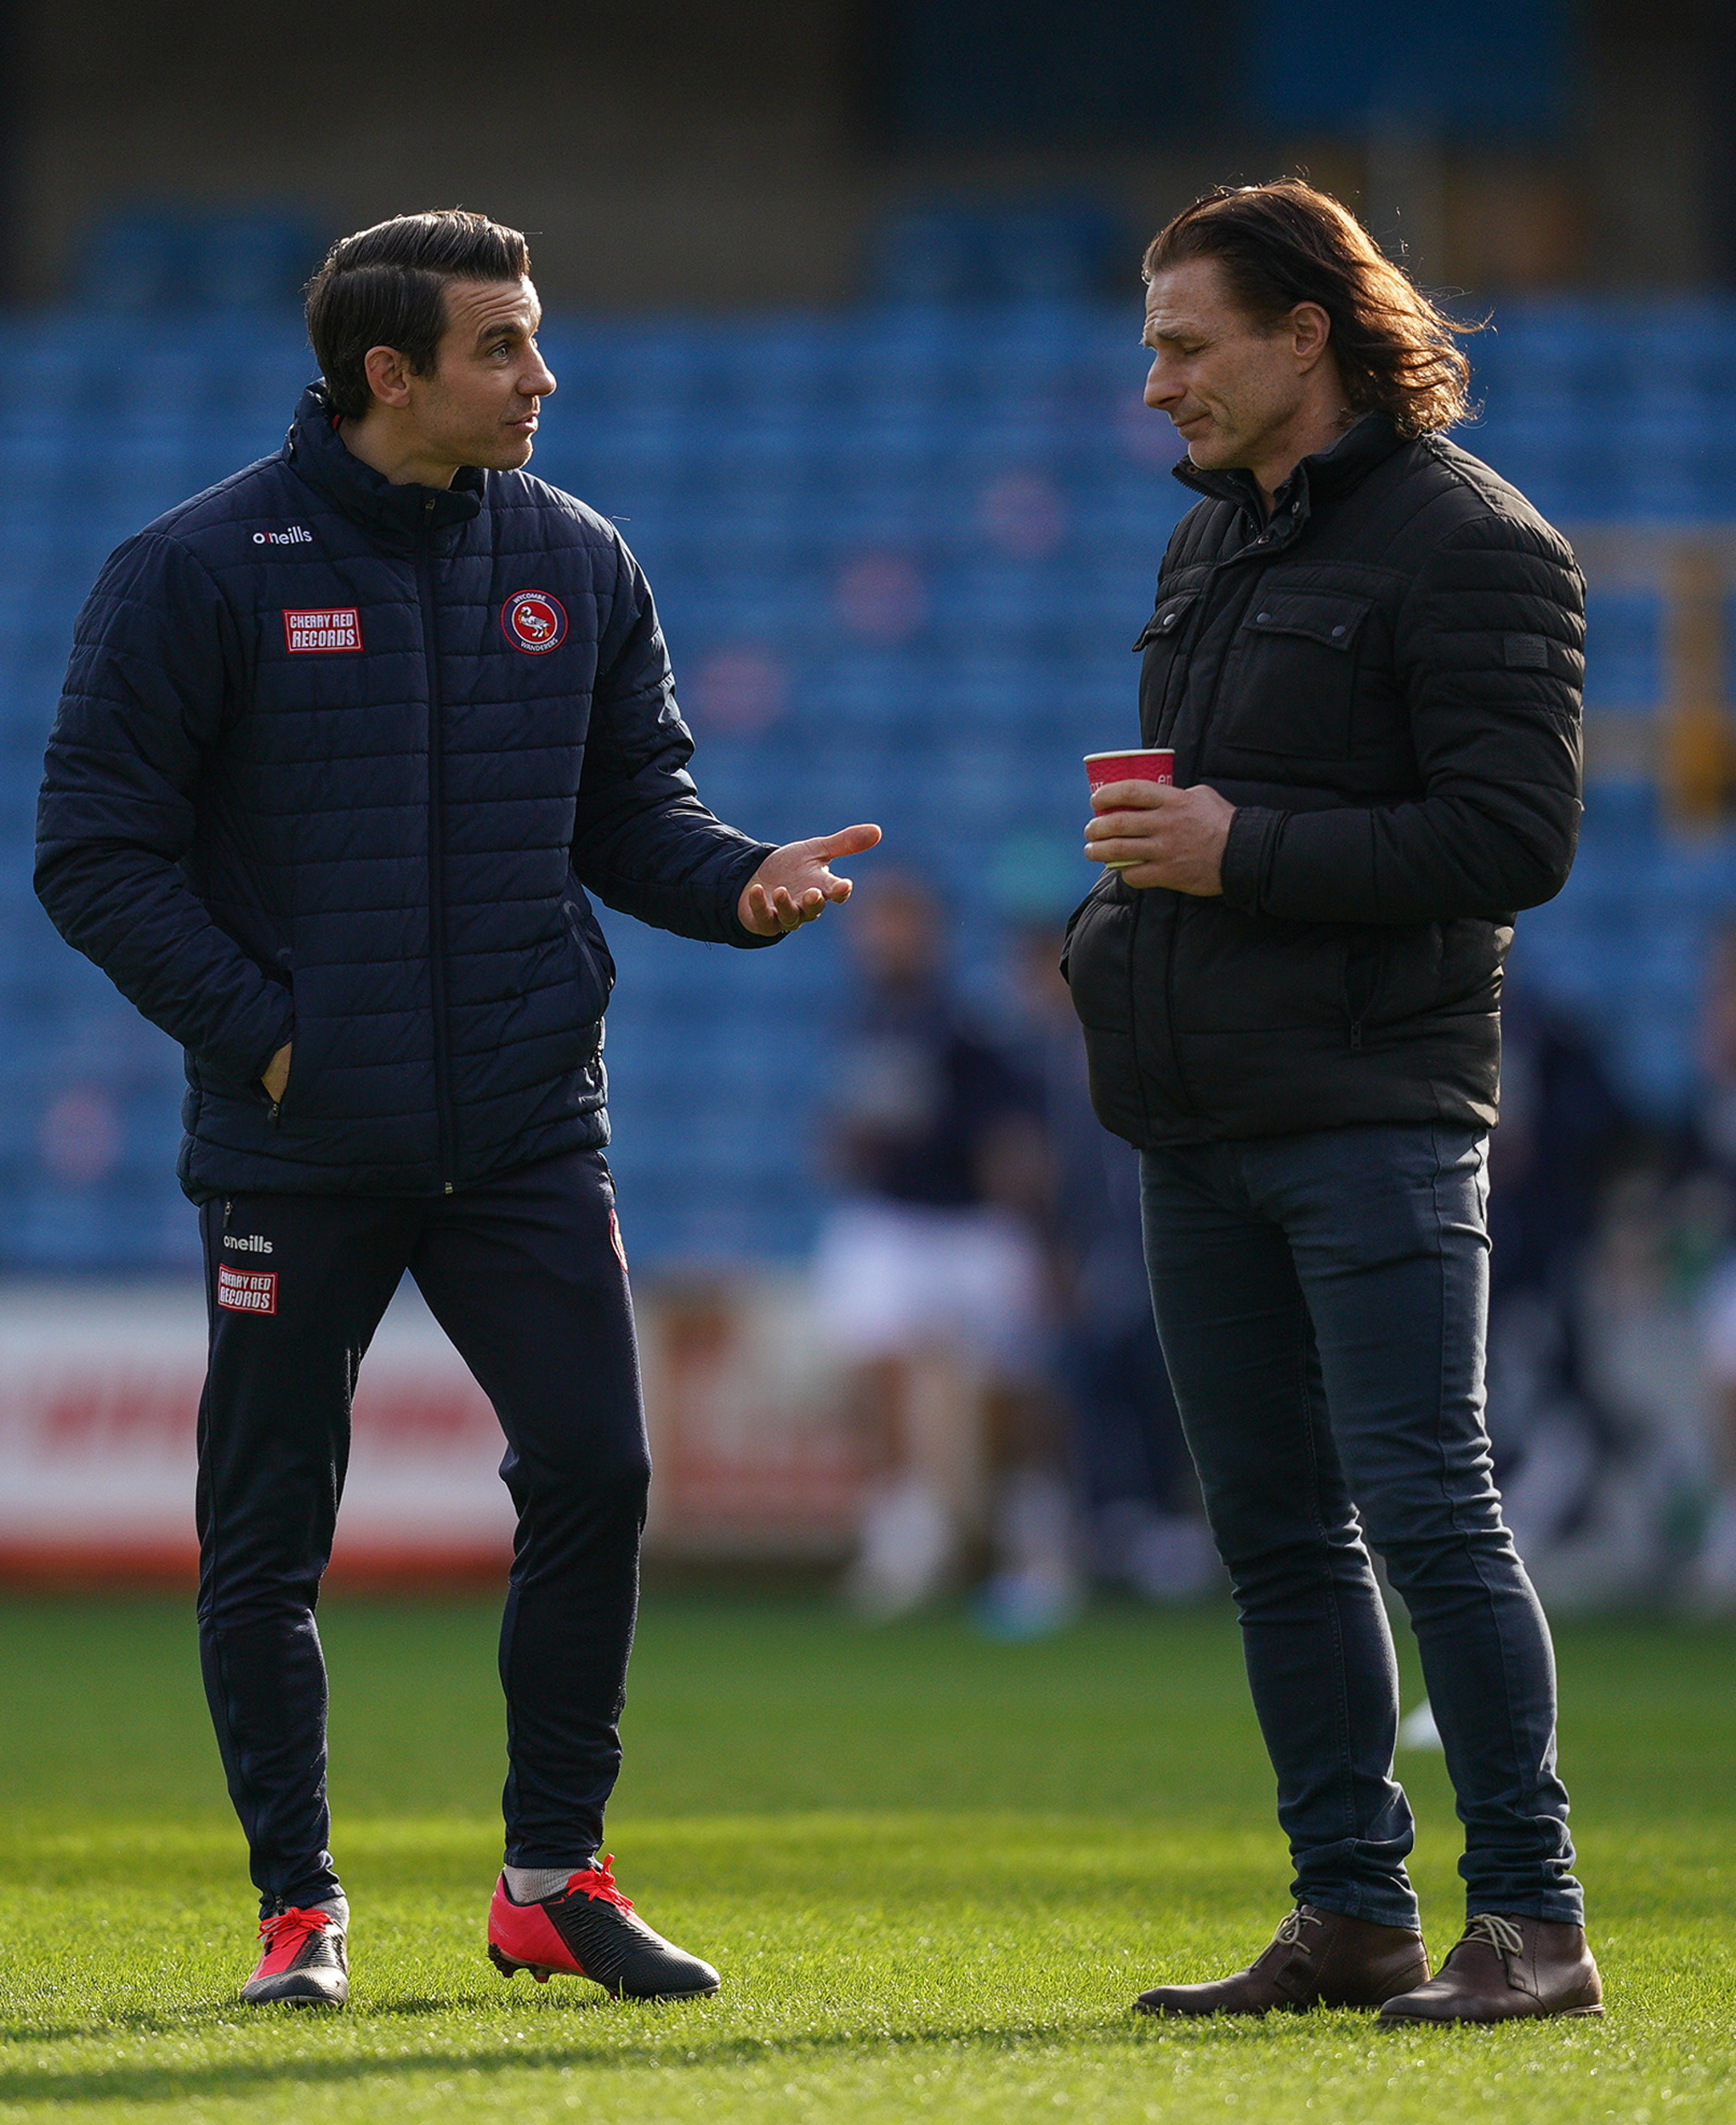 Matt Bloomfield has helped out with the coaching this season, as well as playing for the club - here he is pictured with manager Gareth Ainsworth before the 0-0 draw against Millwall on February 20 (Prime Media)